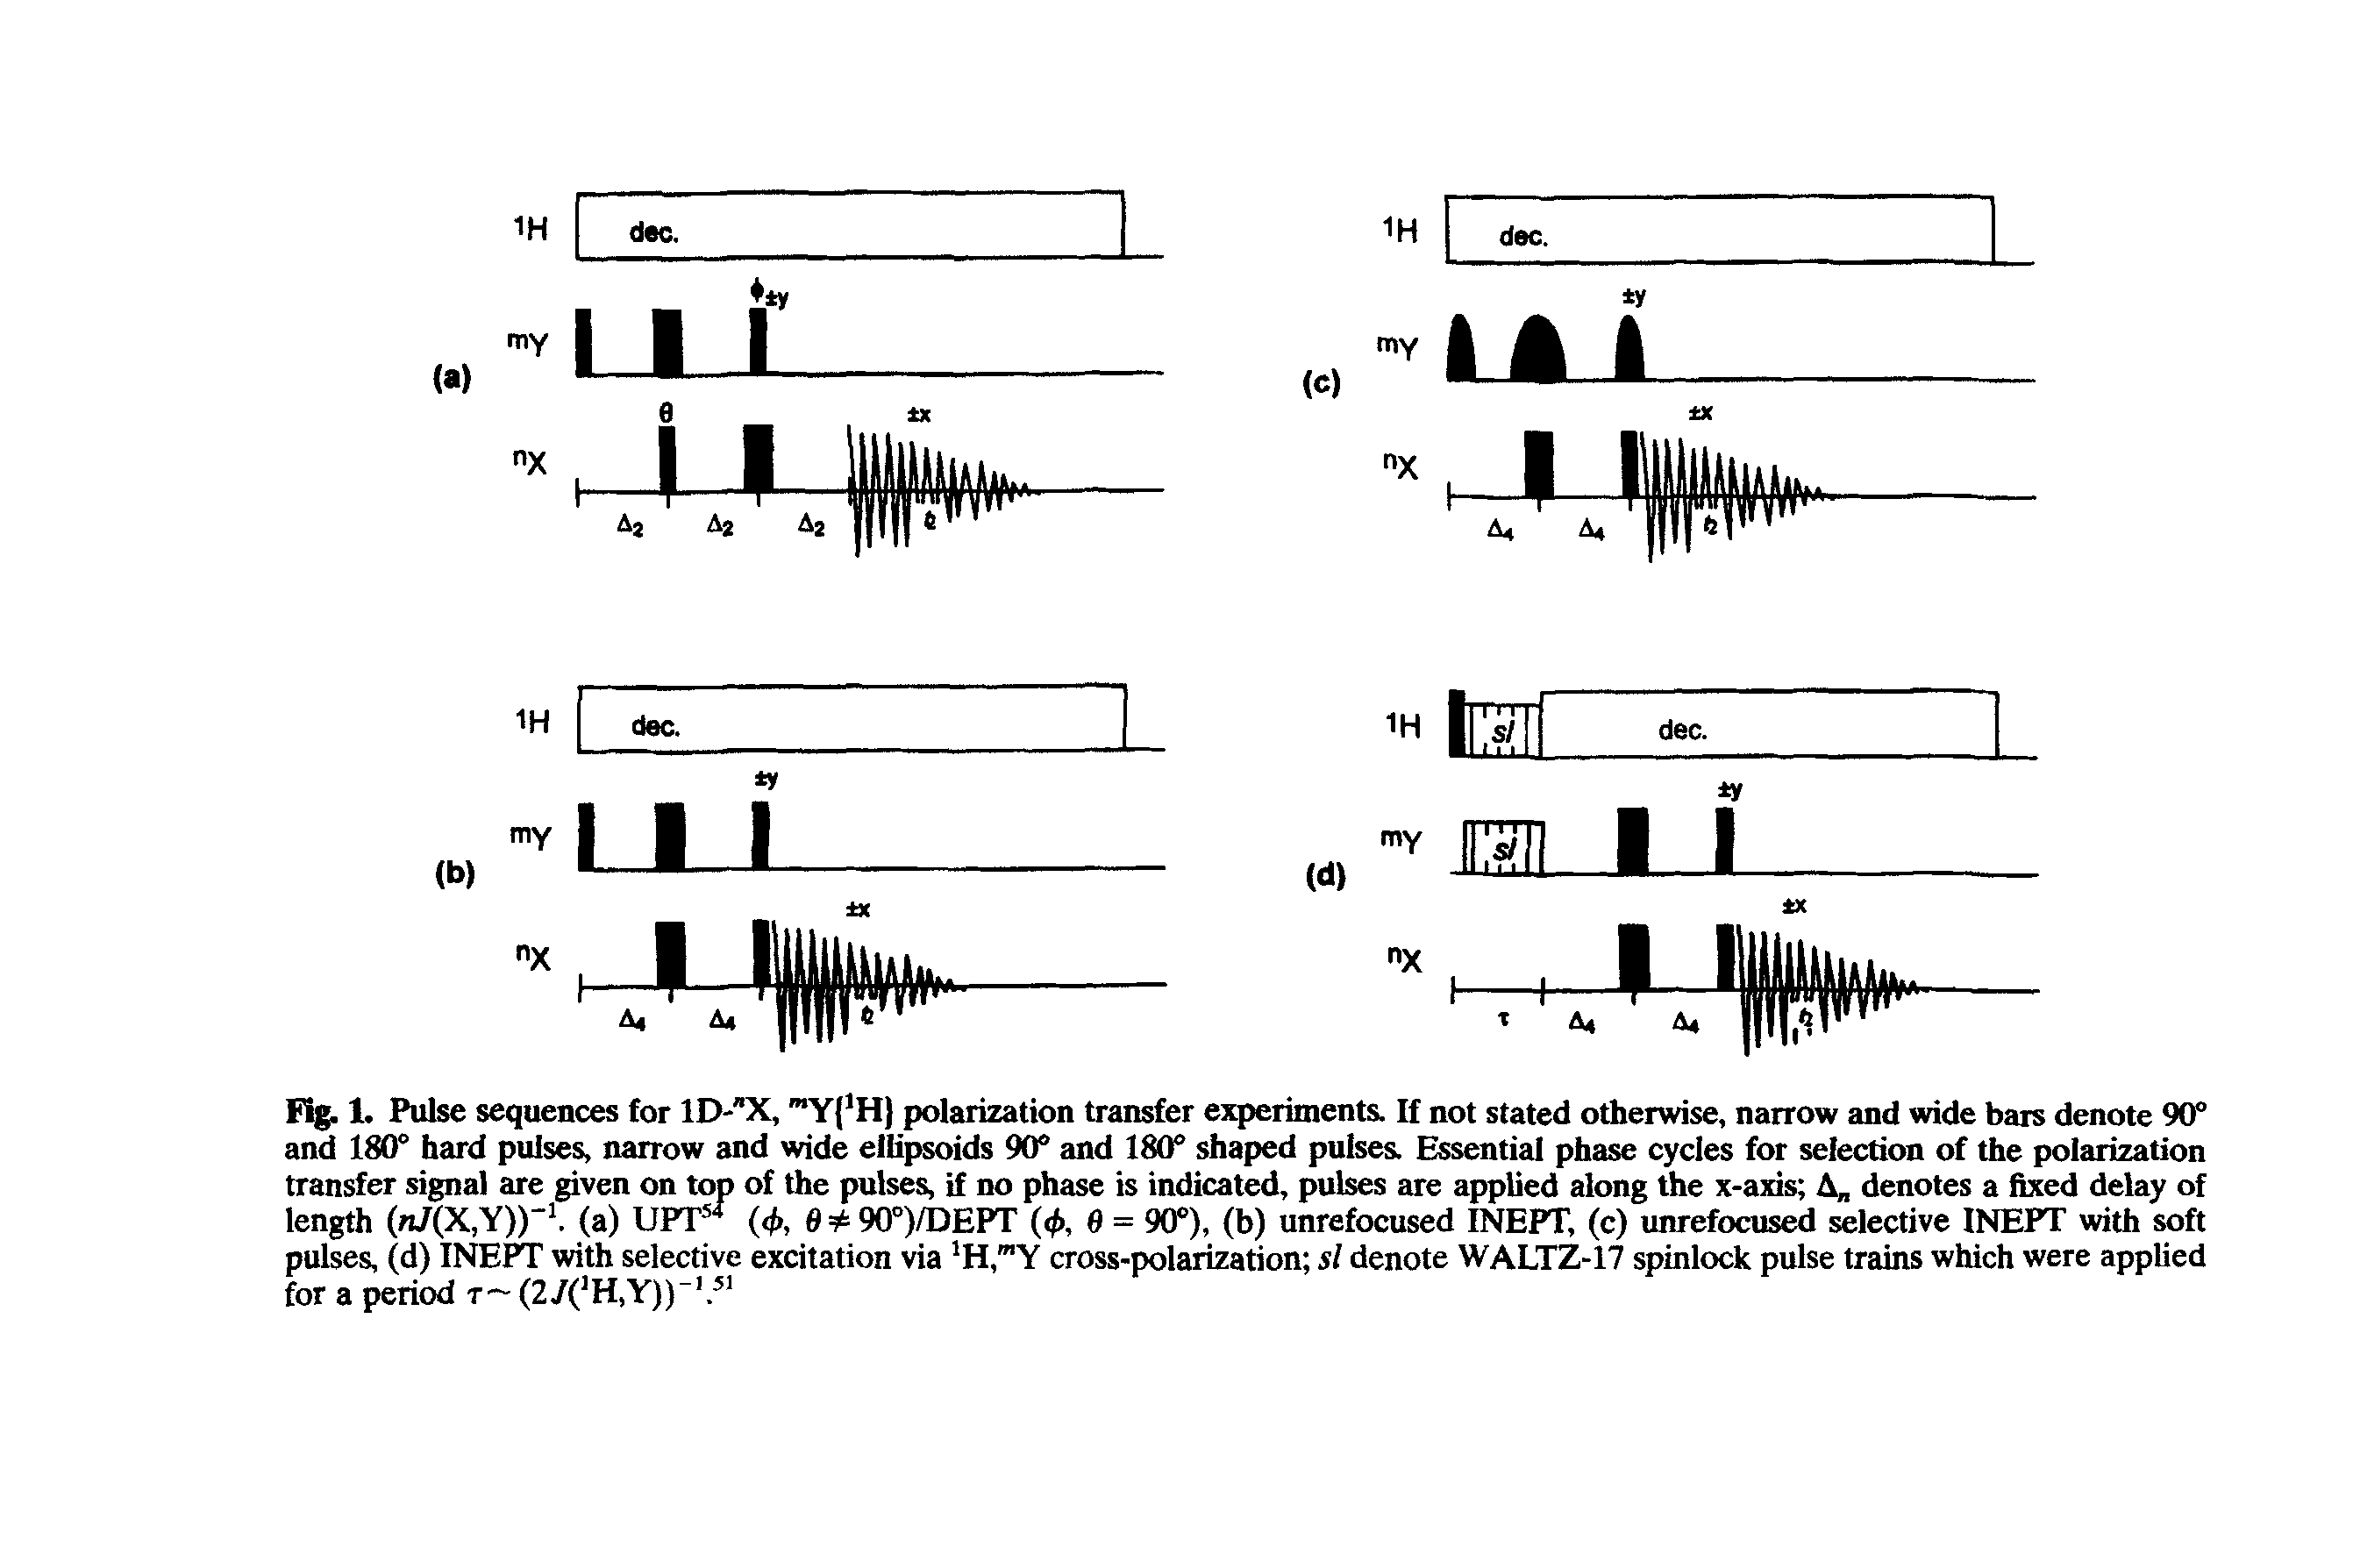 Fig. 1. Pulse sequences for ID- X, "Y H) polarization transfer experiments. If not stated otherwise, narrow and wide bars denote 90° and 180° hard pulses, narrow and wide ellipsoids 90° and 180° shaped pulses. Essential phase cycles for selection of the polarization transfer signal are given on top of the pulses, if no phase is indicated, pulses are applied along the x-axis A denotes a fixed delay of length (n/(X,Y))" (a) UPT (<j), =it 90°)/DEPT (4>, 0 = 90°), (b) unrefocused INEPT, (c) unrefocused selective INEPT with soft pulses, (d) INEPT with selective excitation via H, "Y cross-polarization si denote WALTZ-17 spinlock pulse trains which were applied for a period t— (2/( H,Y)) ...